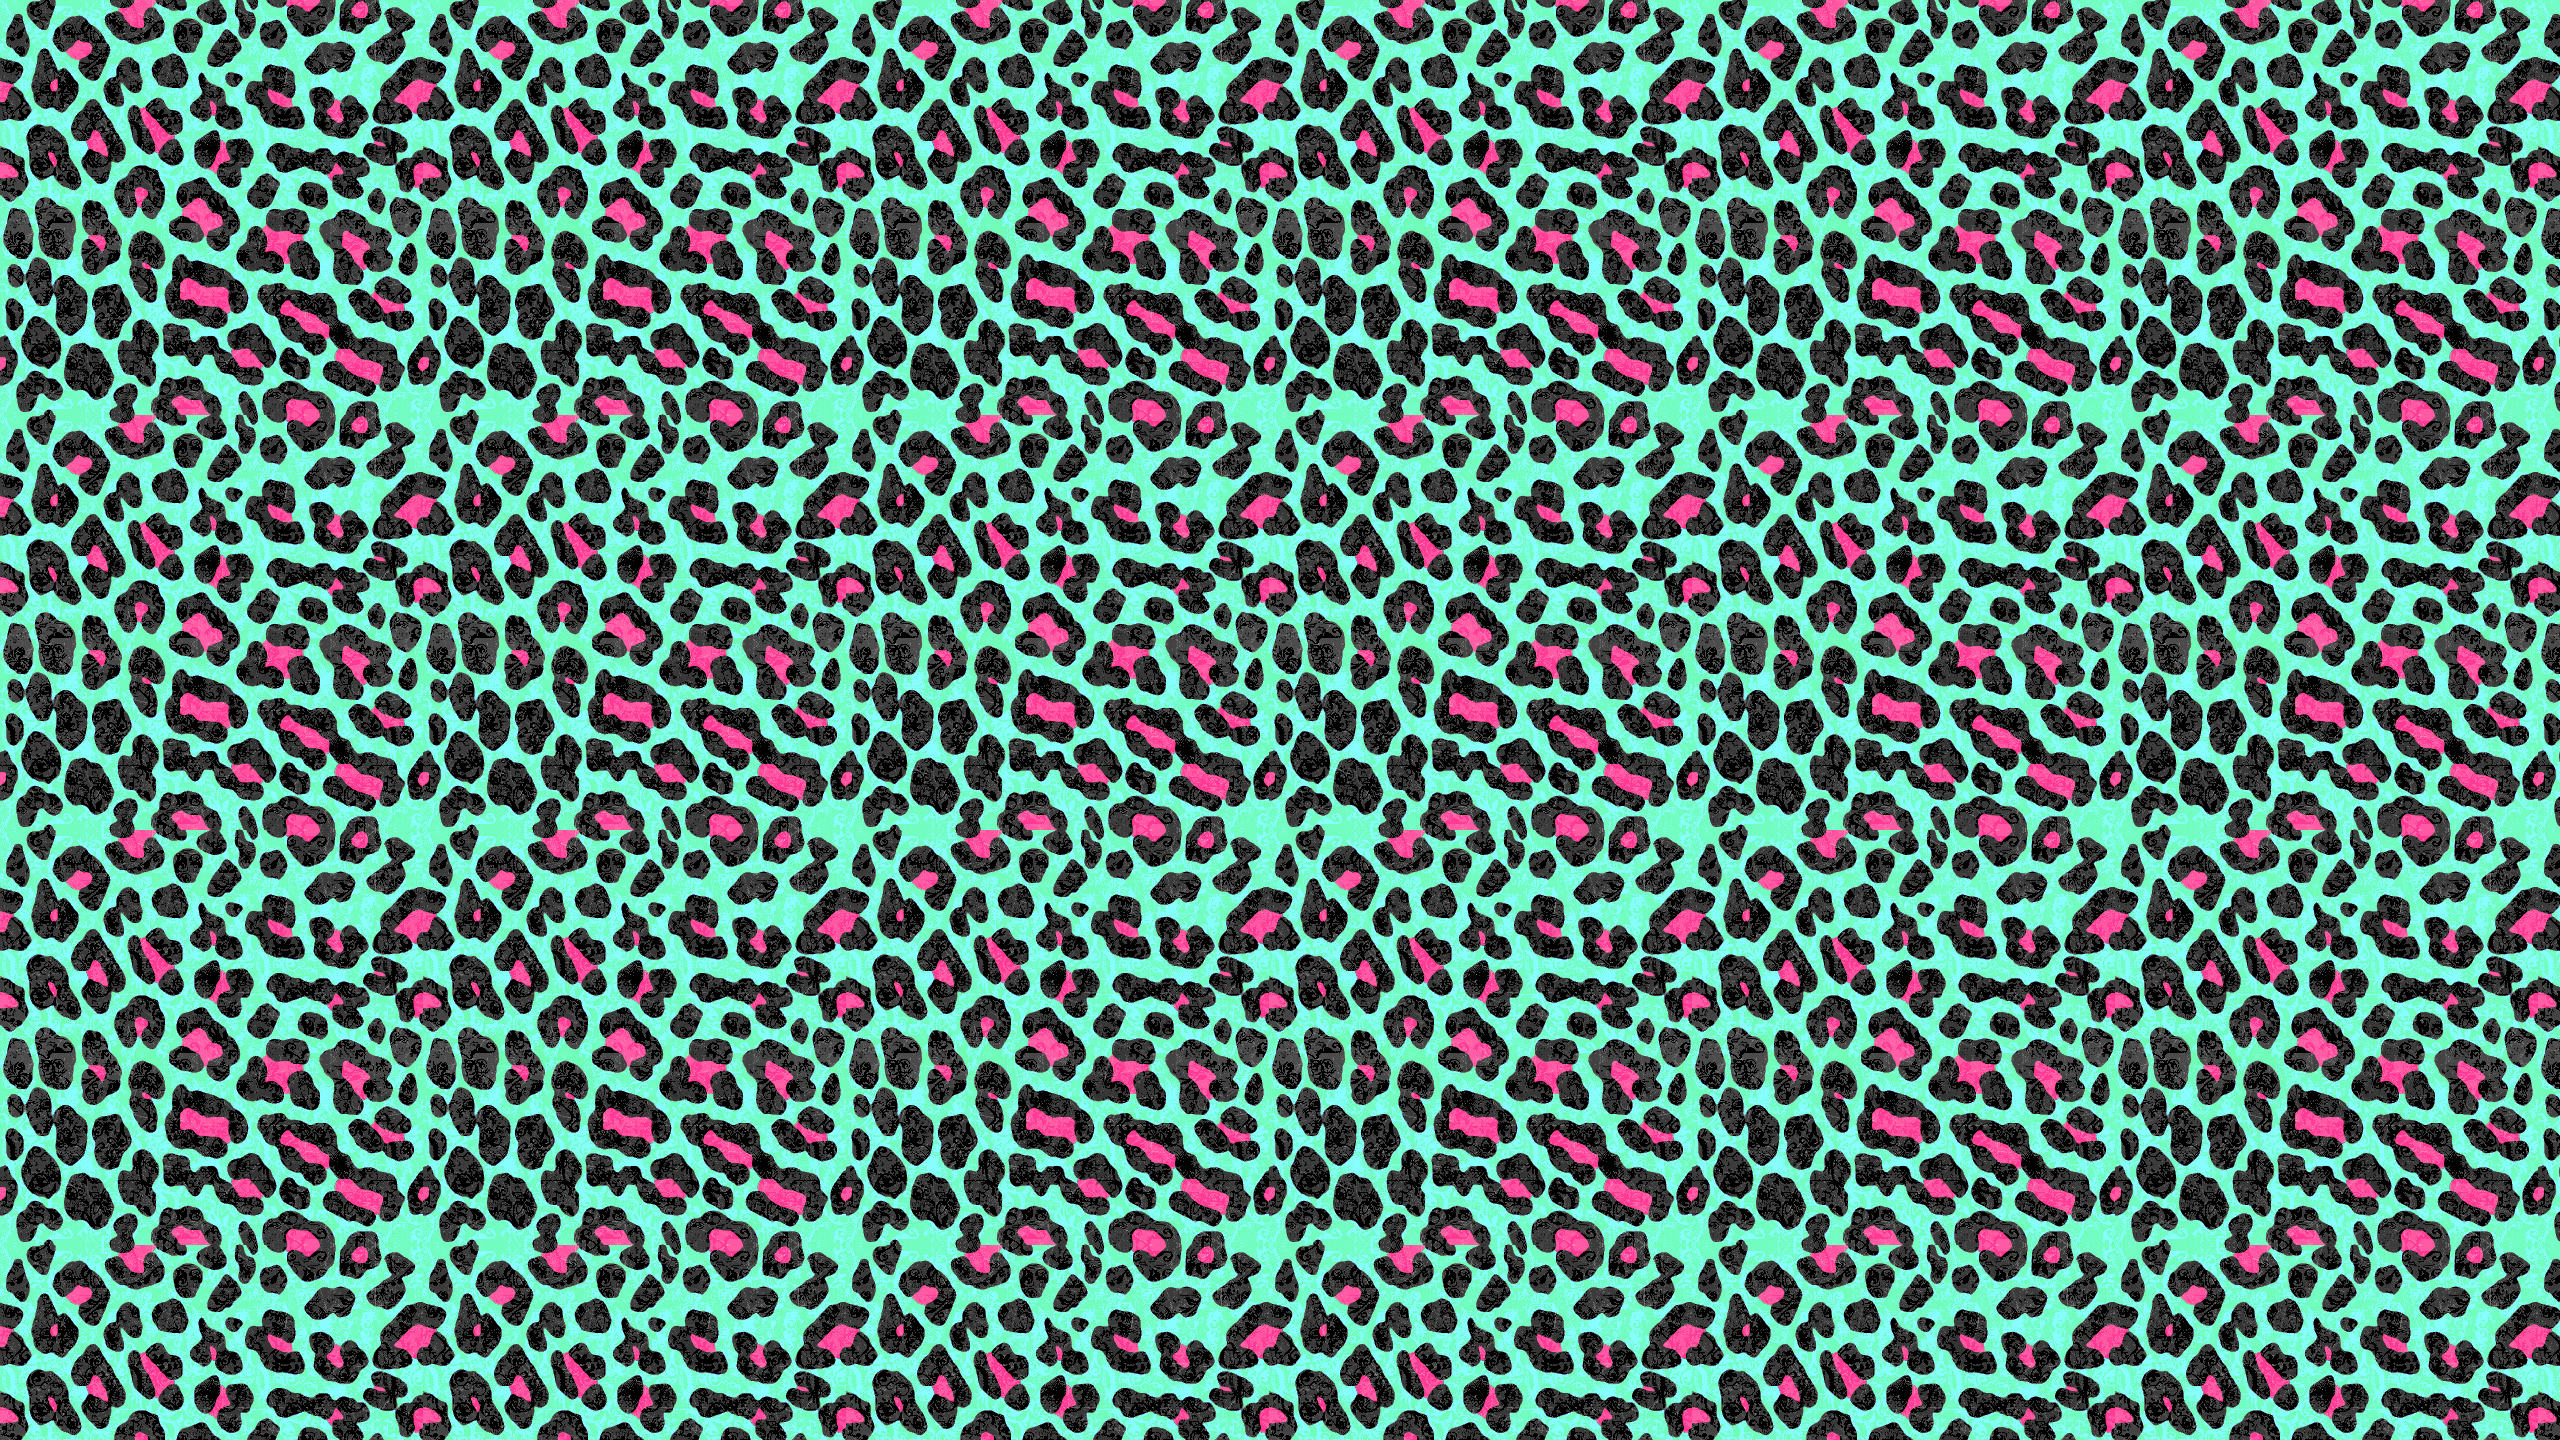 This Animal Print Desktop Wallpaper Is Easy Just Save The